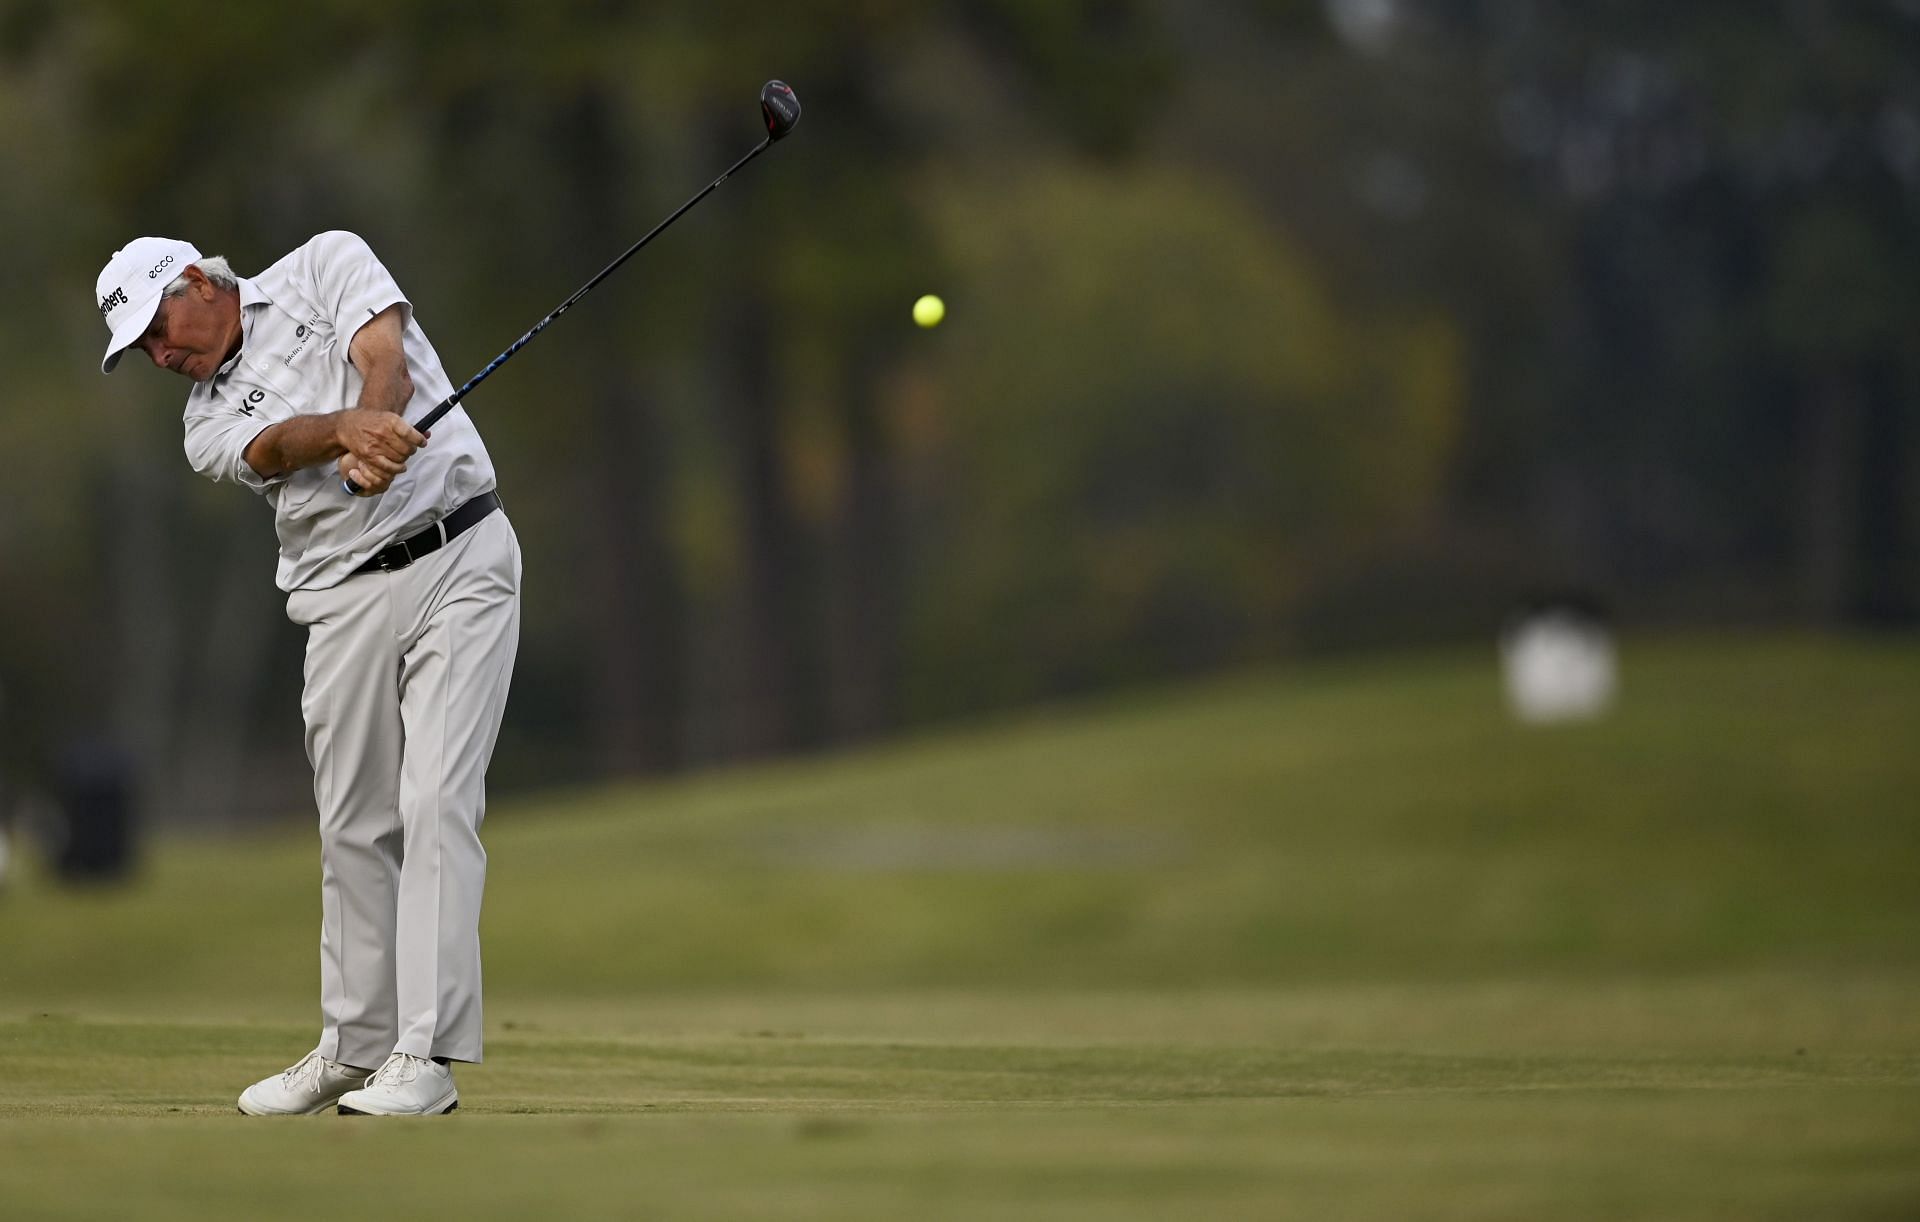 Fred Couples at the SAS Championship - Final Round (Image via Eakin Howard/Getty Images)